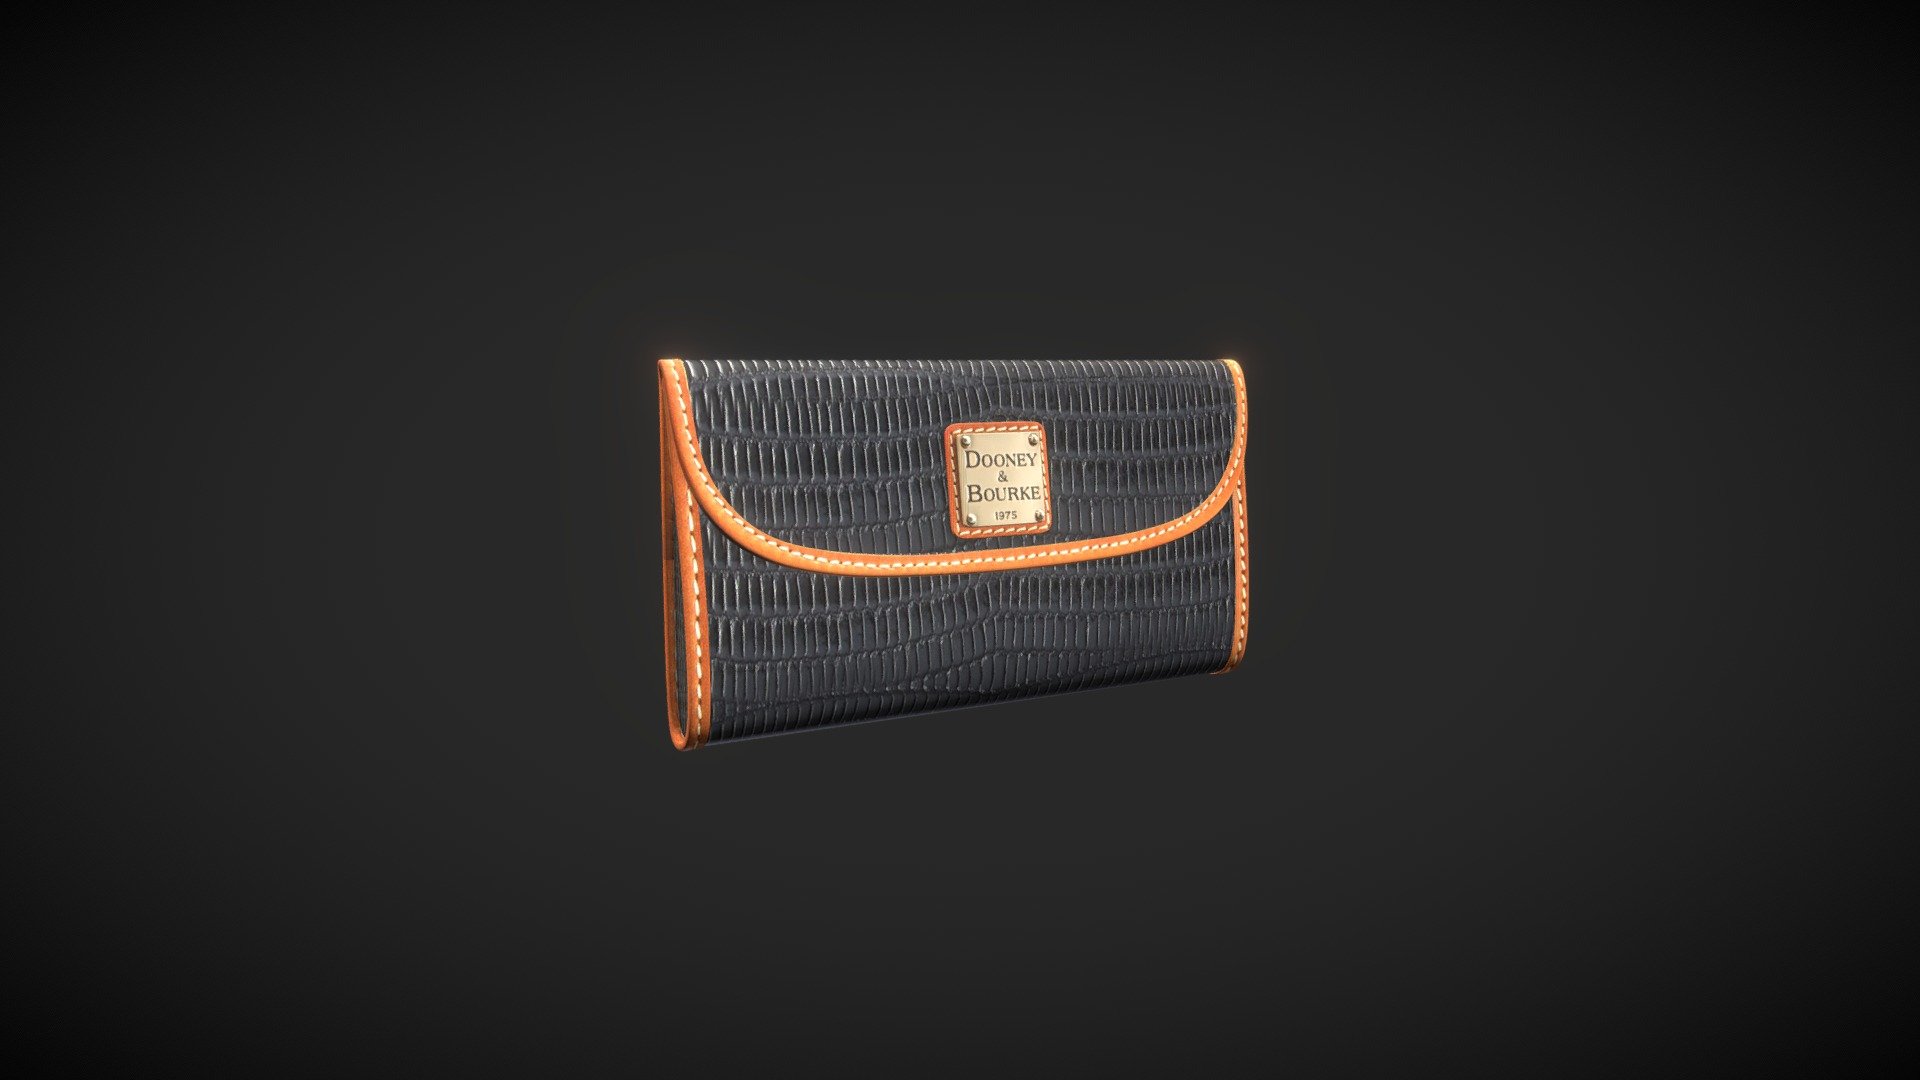 It was a fun creating this lizzard skin leather wallet, used 3ds max for modeling and adobe photoshop for texturing 3d model